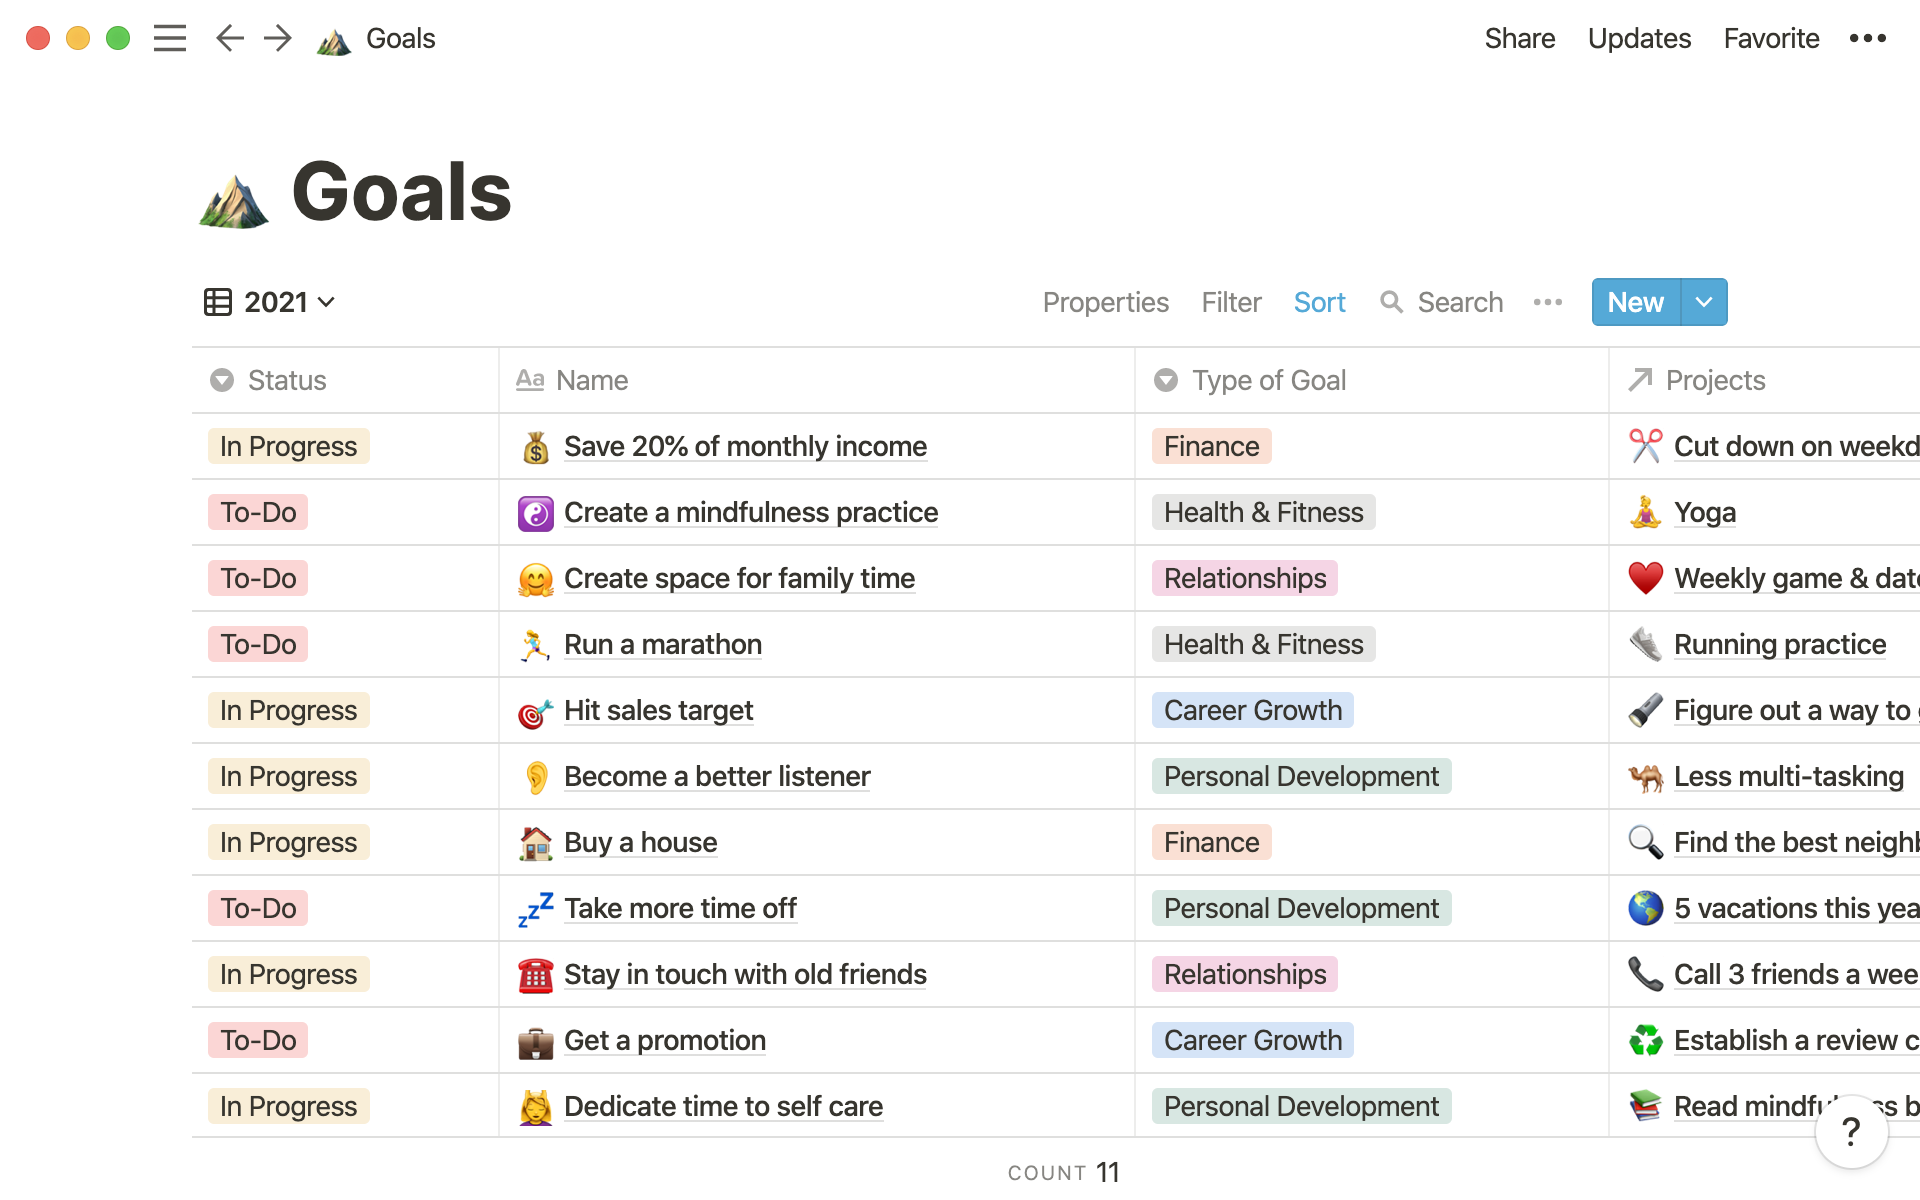 Stay focused and hit milestones with goal-tracking planners.